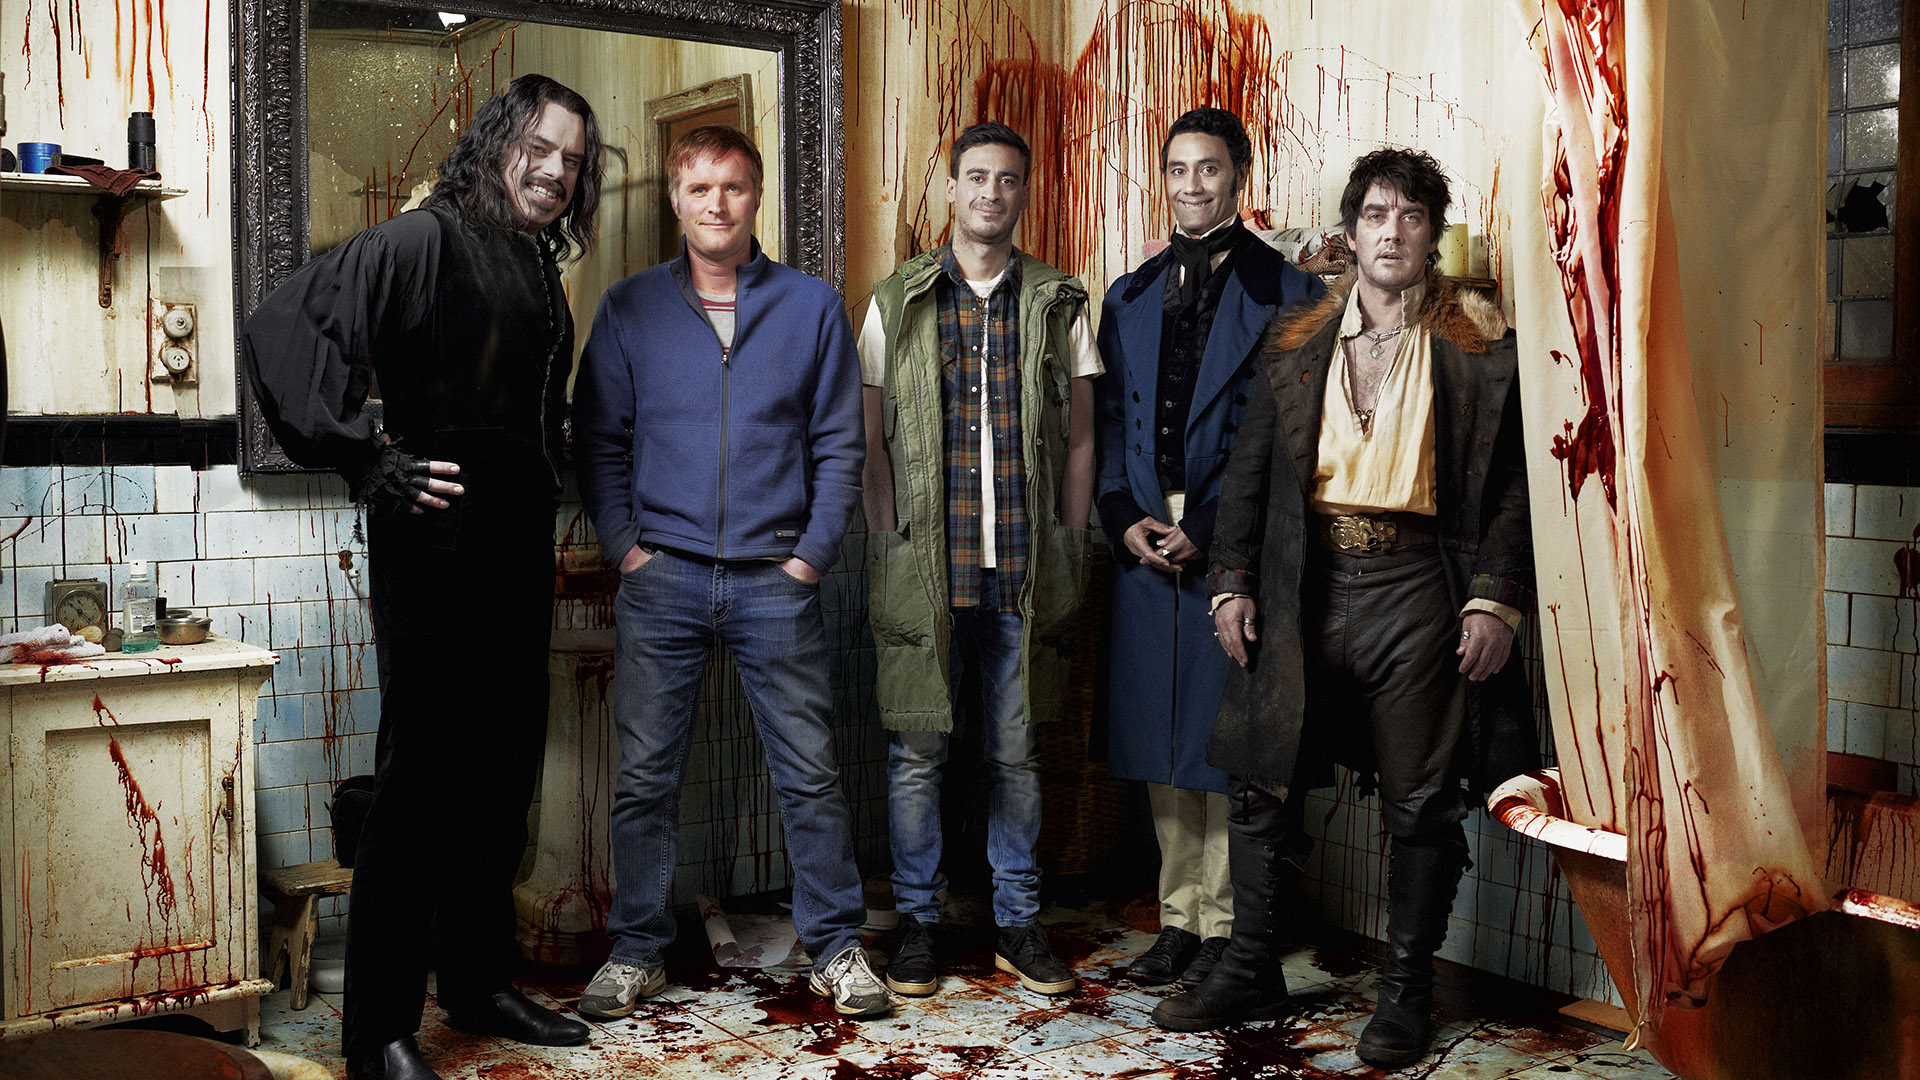 The First Clips of the US TV Remake of What We Do in the Shadows